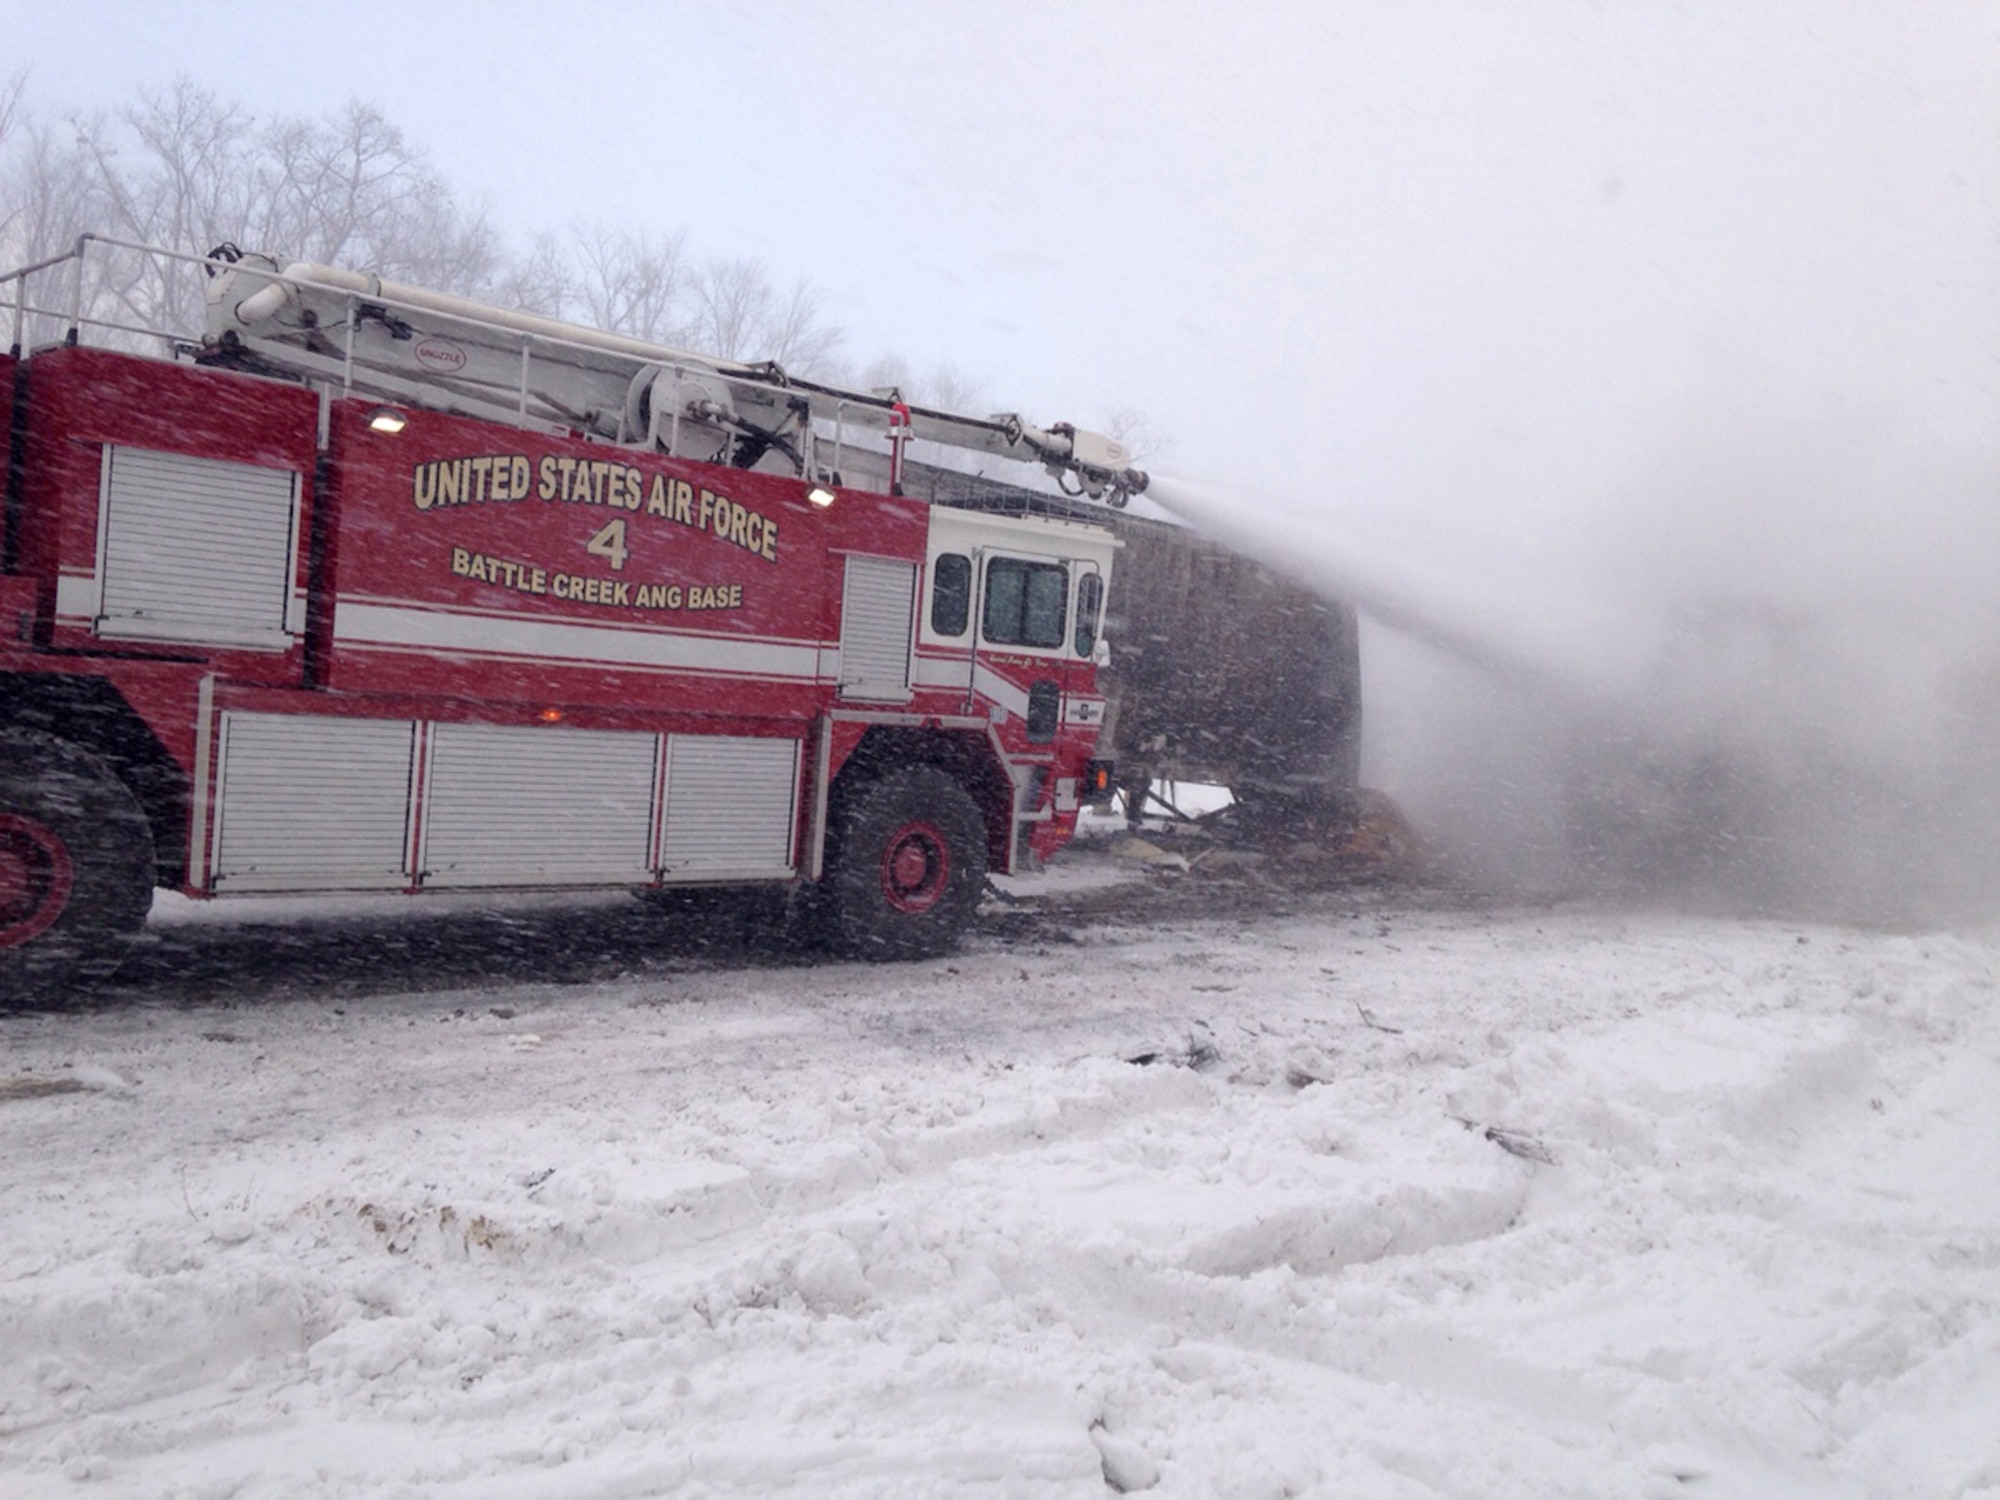 Michigan Air National Guard firefighters from the 110th Attack Wing, Battle Creek Air National Guard Base, respond to a multi-vehicle crash on the I-94 expressway near the base, Jan. 9, 2015. The Air National Guard is “Always on Mission” and Michigan Airmen and equipment demonstrated this capability by assisting civil authorities to protect life and property damage. Photo by Airman 1st Class Bush McCarthy, 110th Civil Engineer Squadron/Released). 